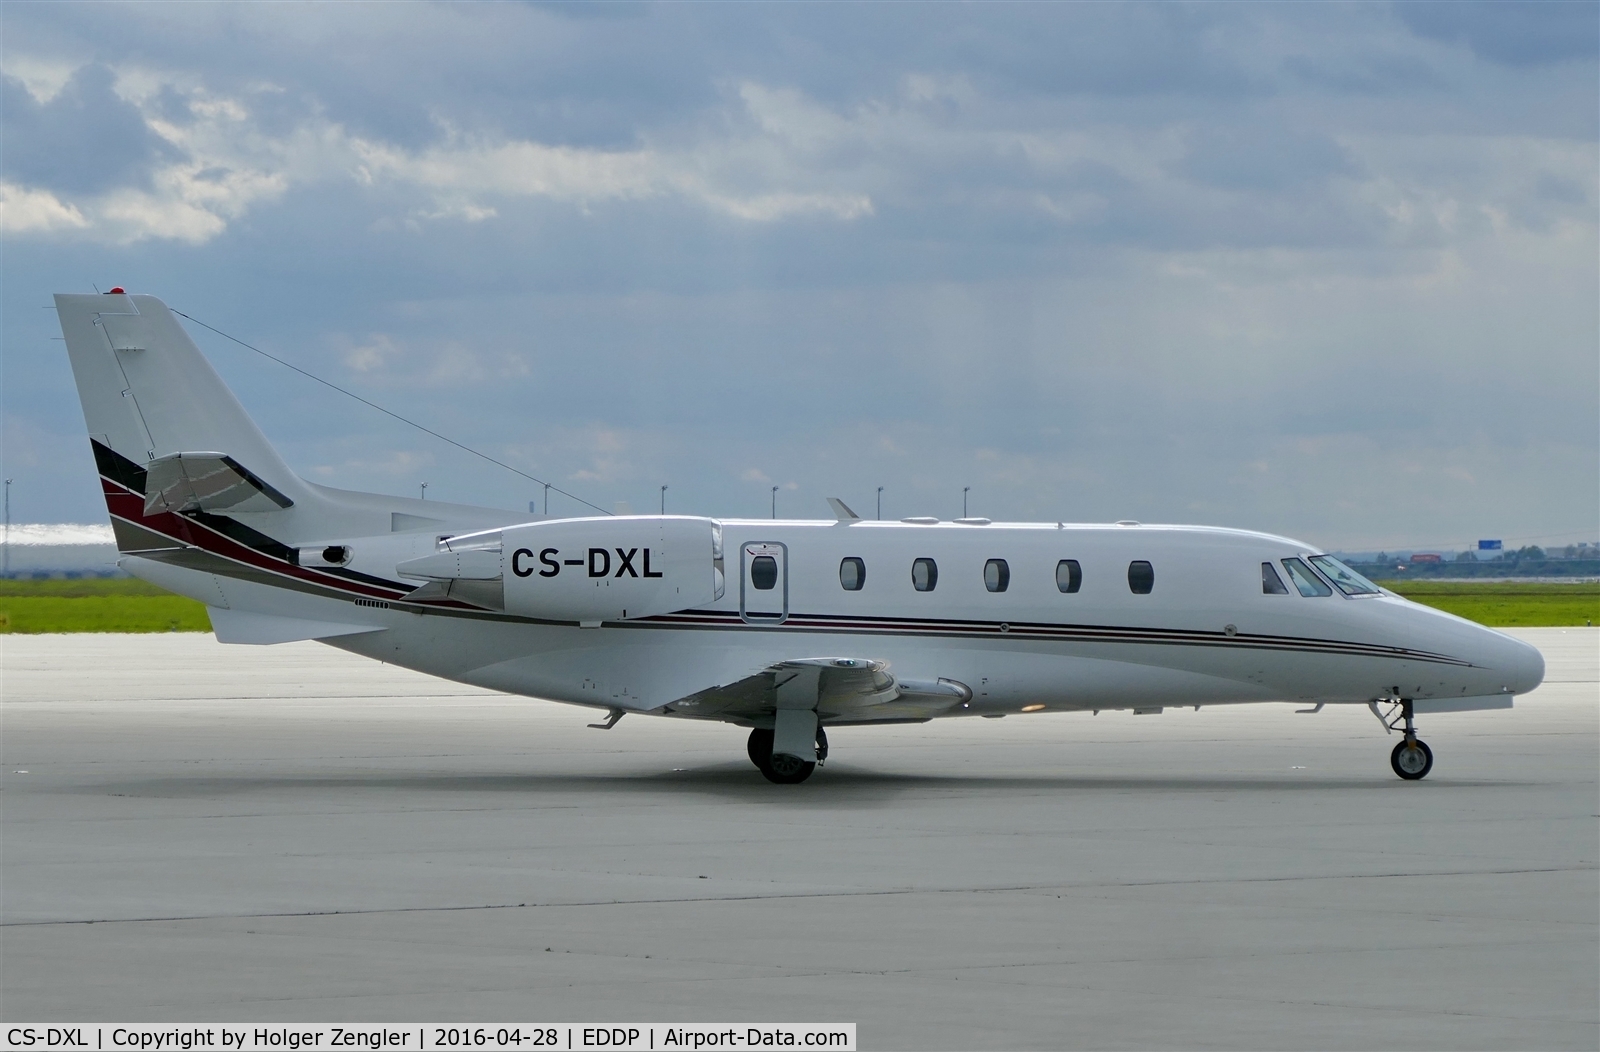 CS-DXL, 2006 Cessna 560XL Citation Excel C/N 560-5640, Visitor from Portugal has just arrived on LEJ.....